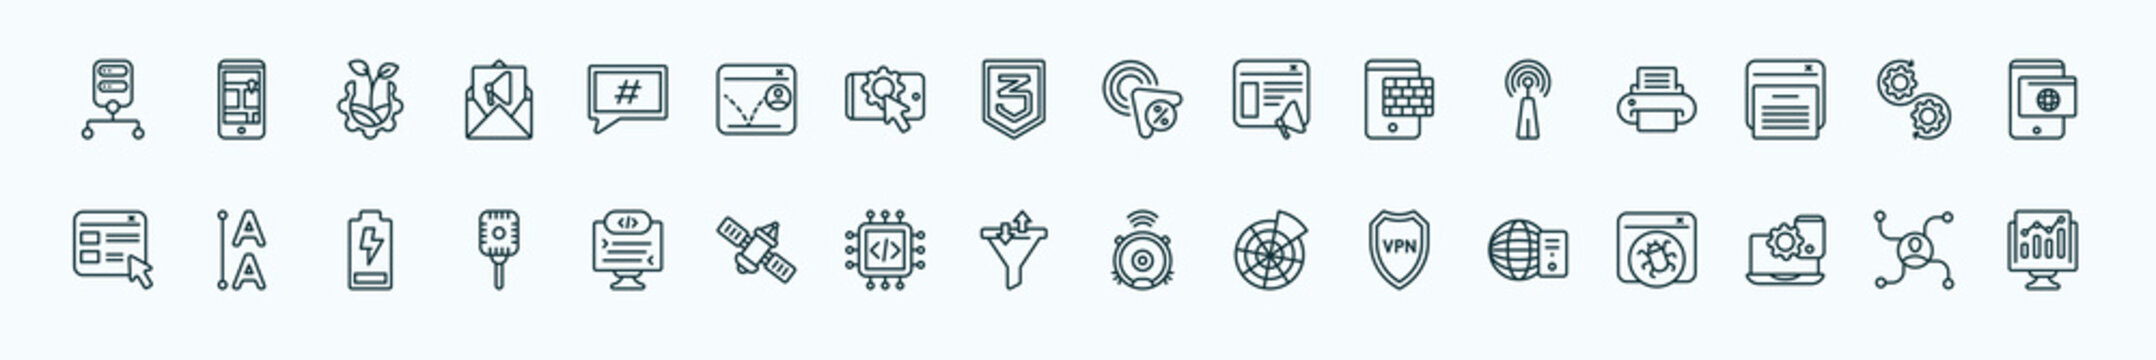 special lineal technology icons set. outline icons such as data architecture, microblogging, click through rate, reach, devops, leading, self-closing tag, sales funnel, vpn, website optimization,